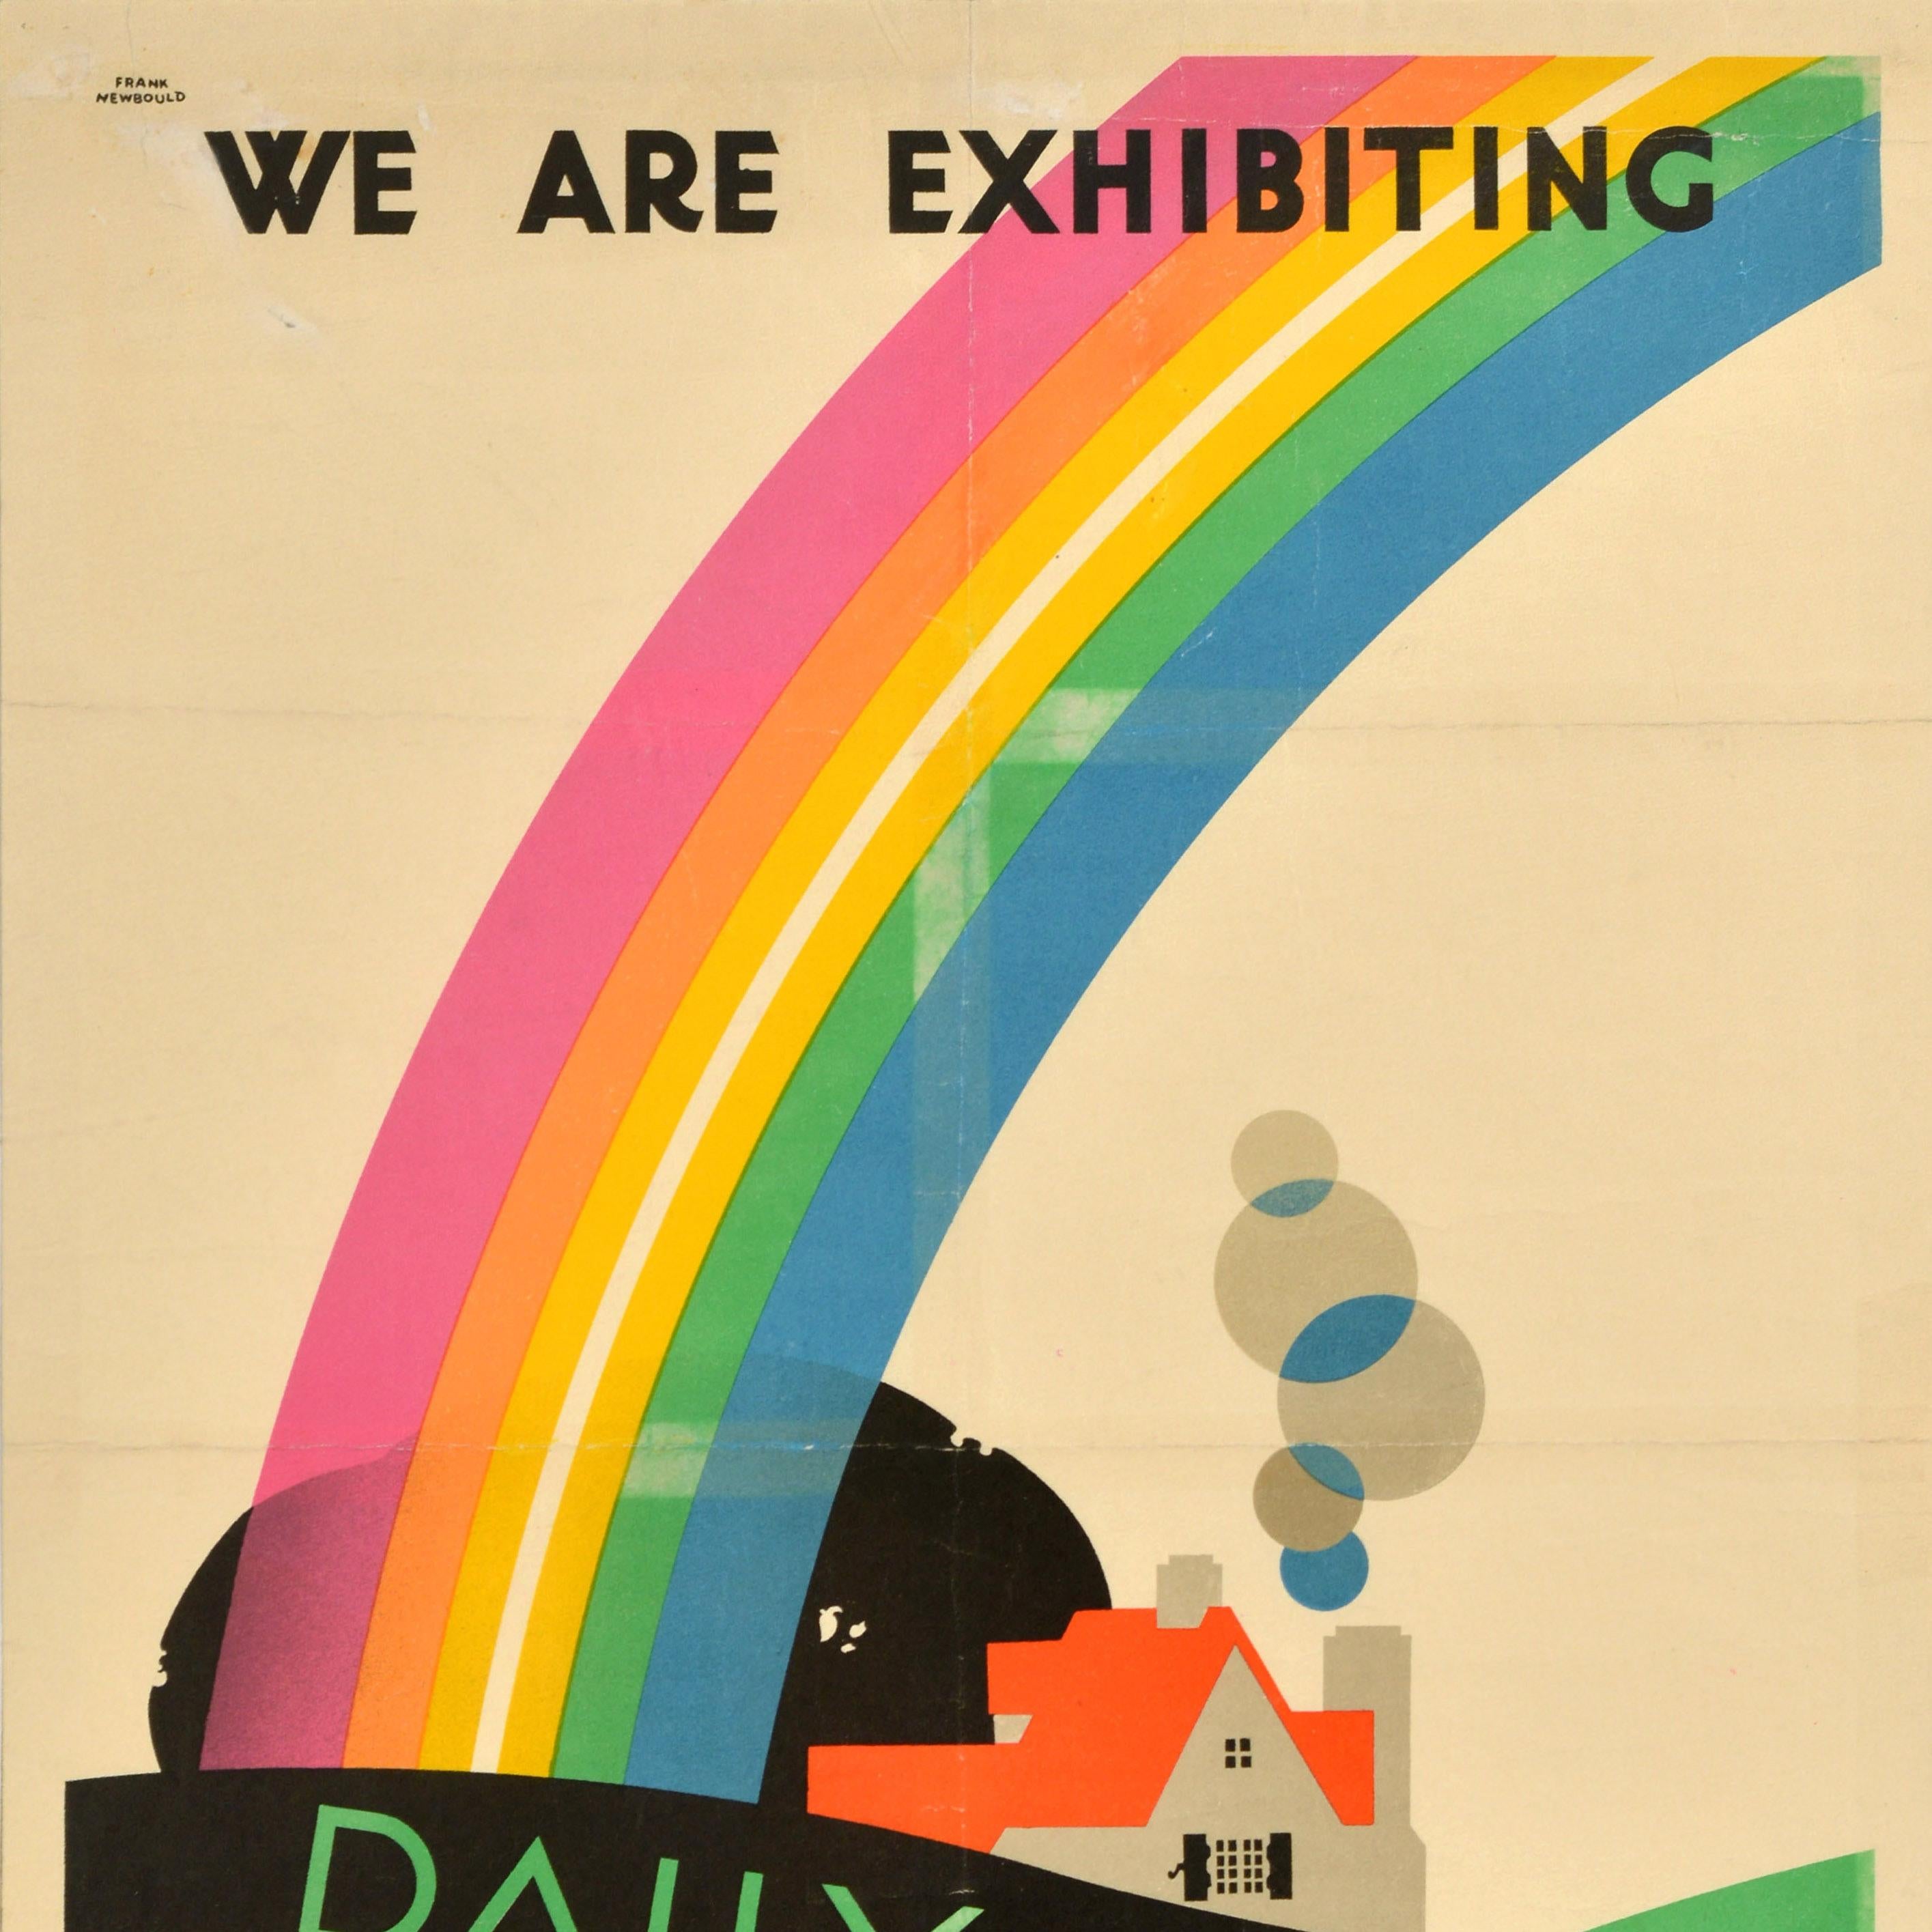 British Original Vintage Advertising Poster Ideal Home Exhibition Daily Mail Olympia For Sale